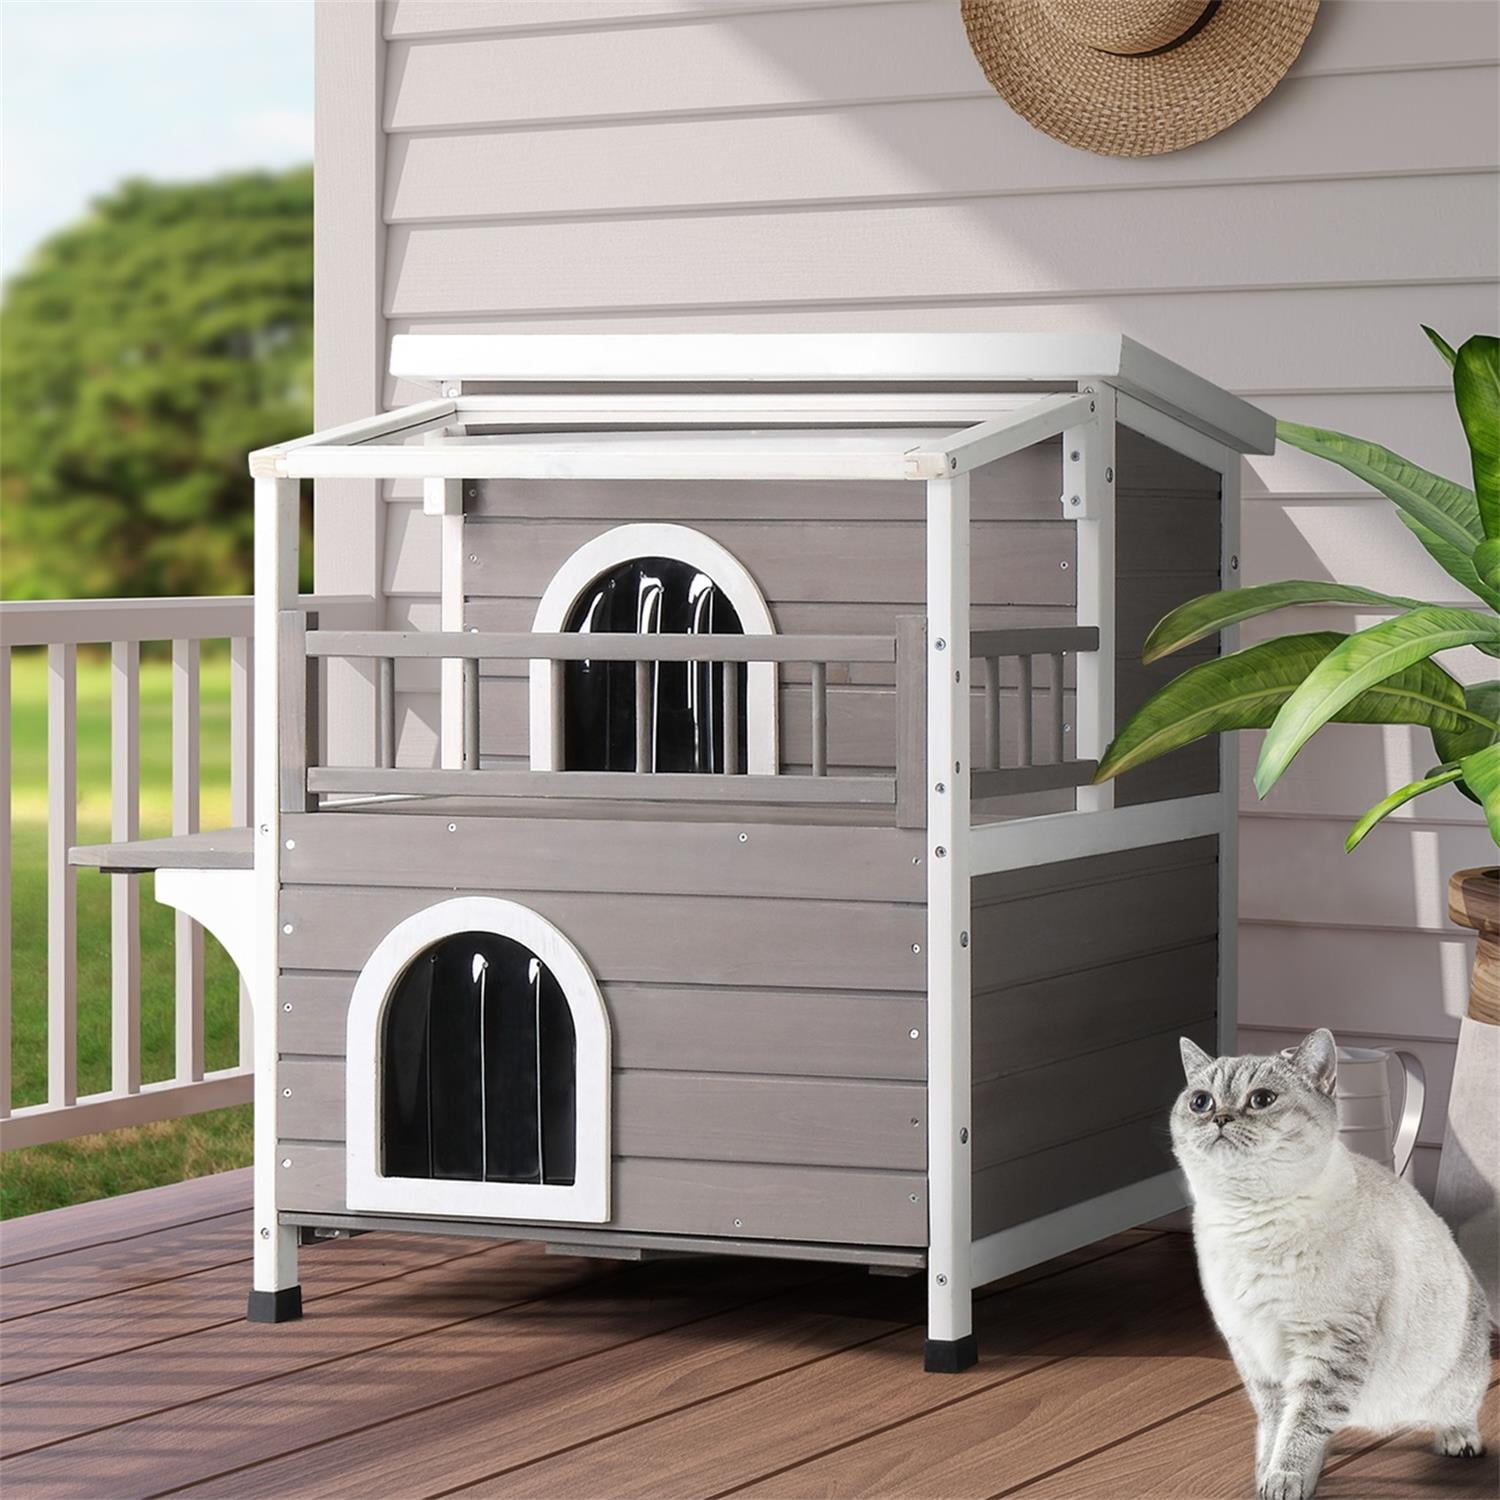 Aivituvin Luxurious Wooden Cat House with Insulated Design and 2-storey Comfort